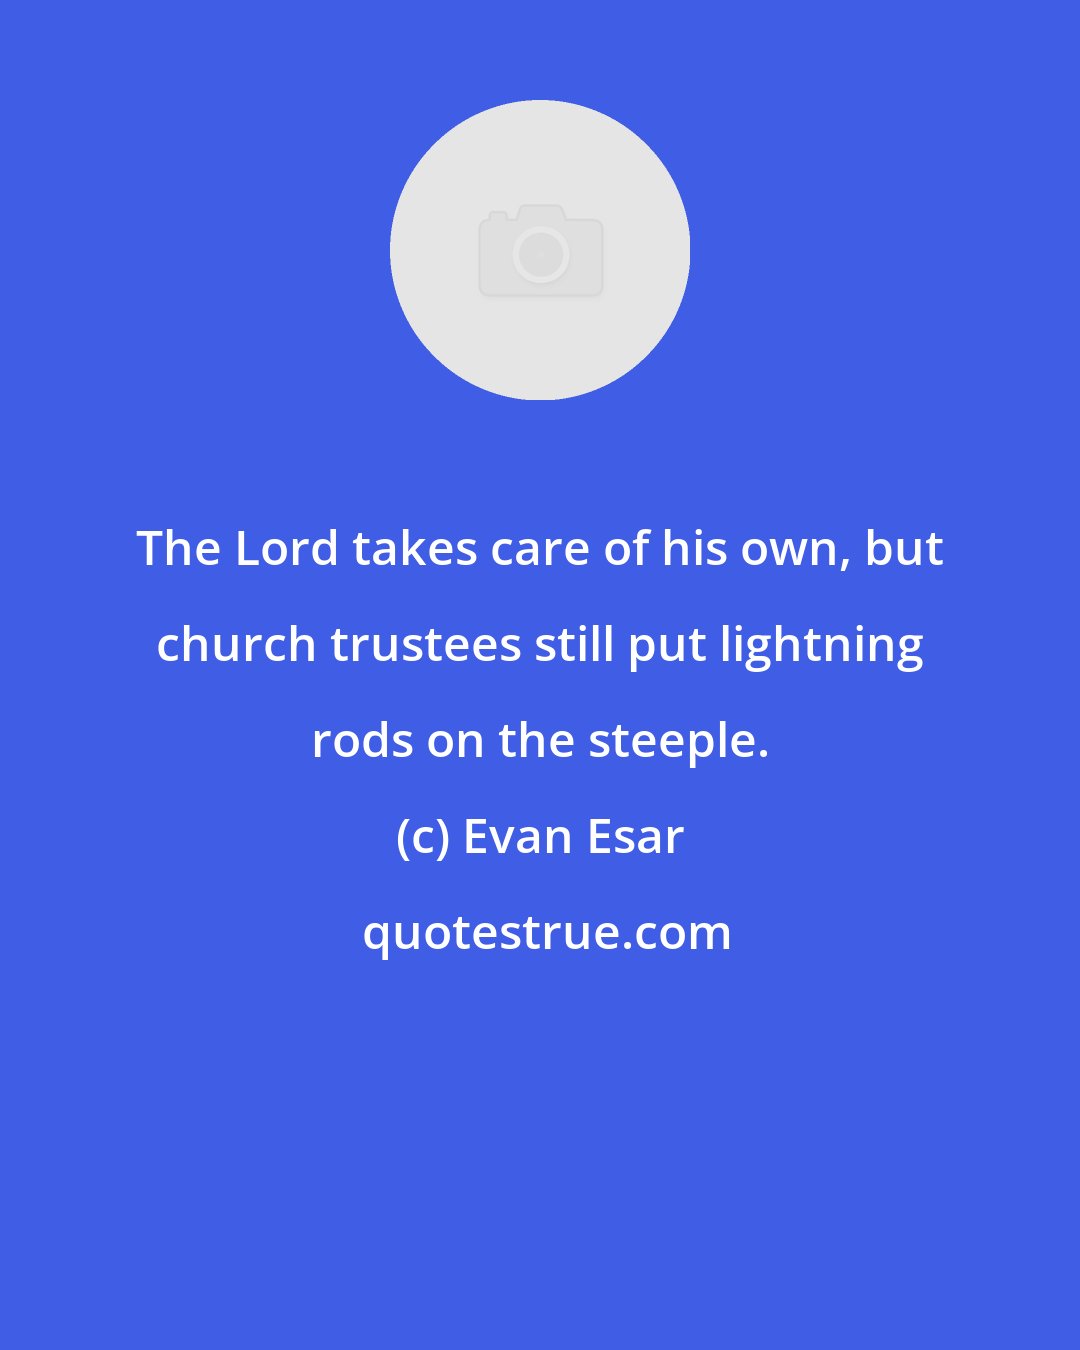 Evan Esar: The Lord takes care of his own, but church trustees still put lightning rods on the steeple.